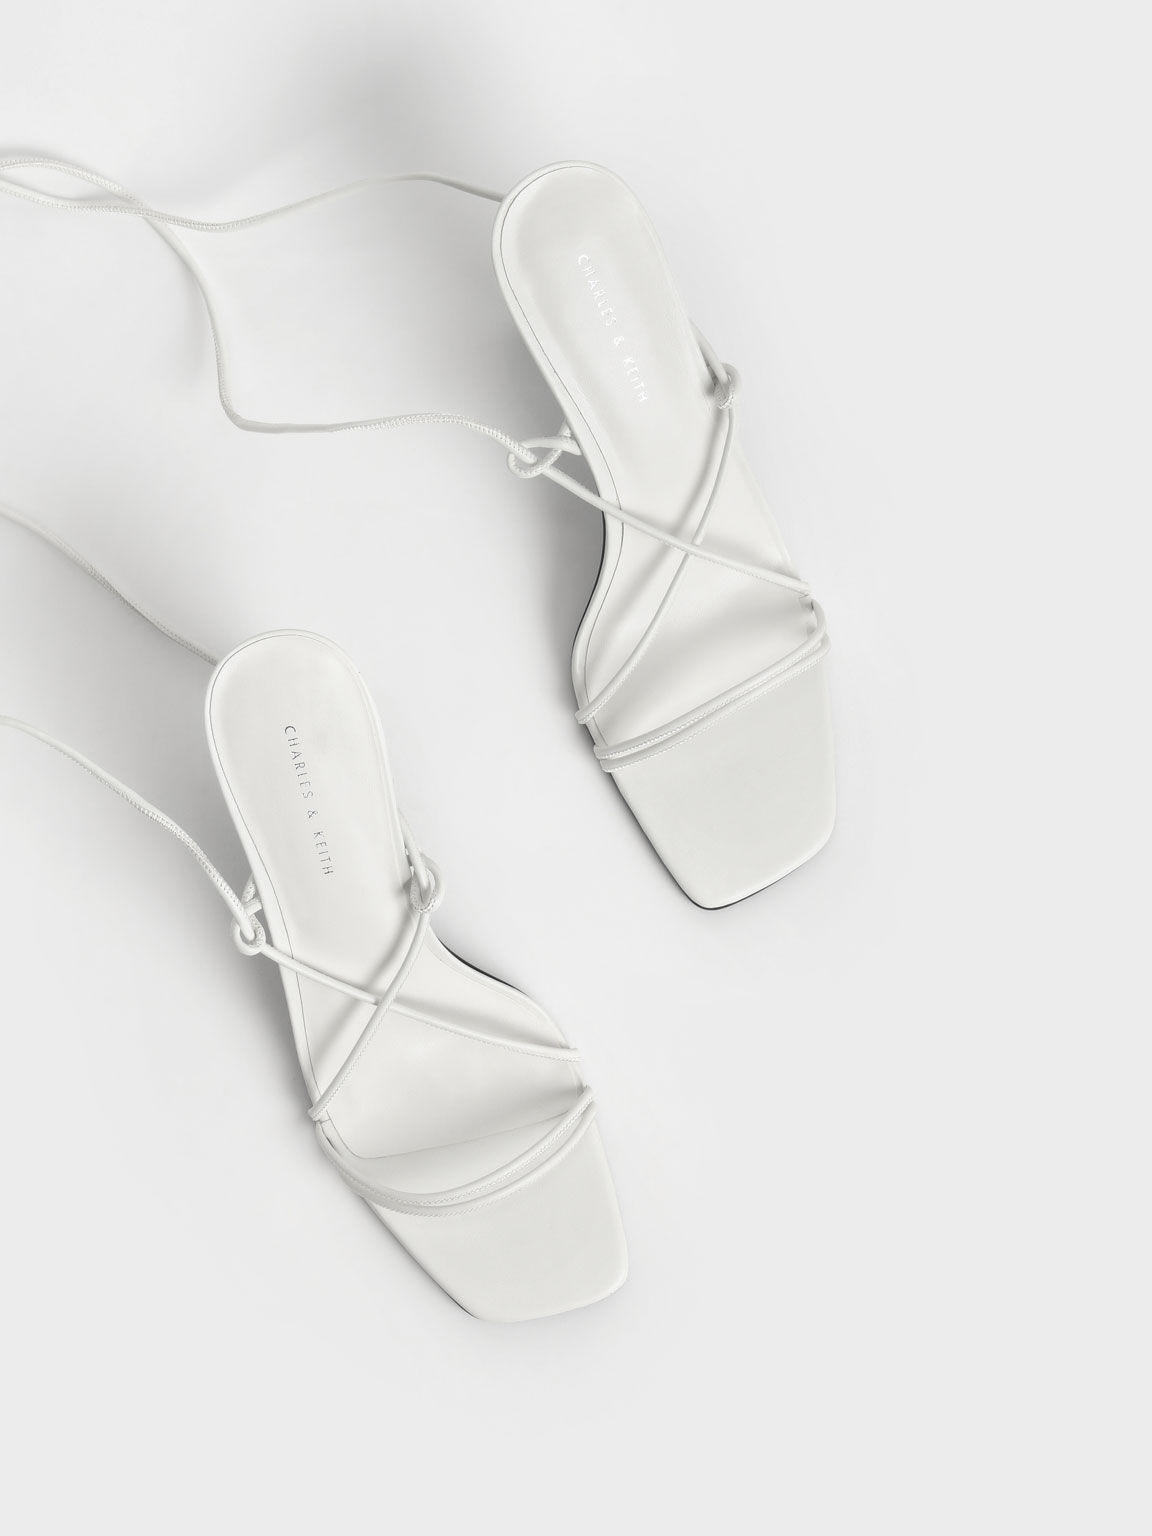 Women's Sandals | Shop Exclusive Styles | CHARLES & KEITH UK